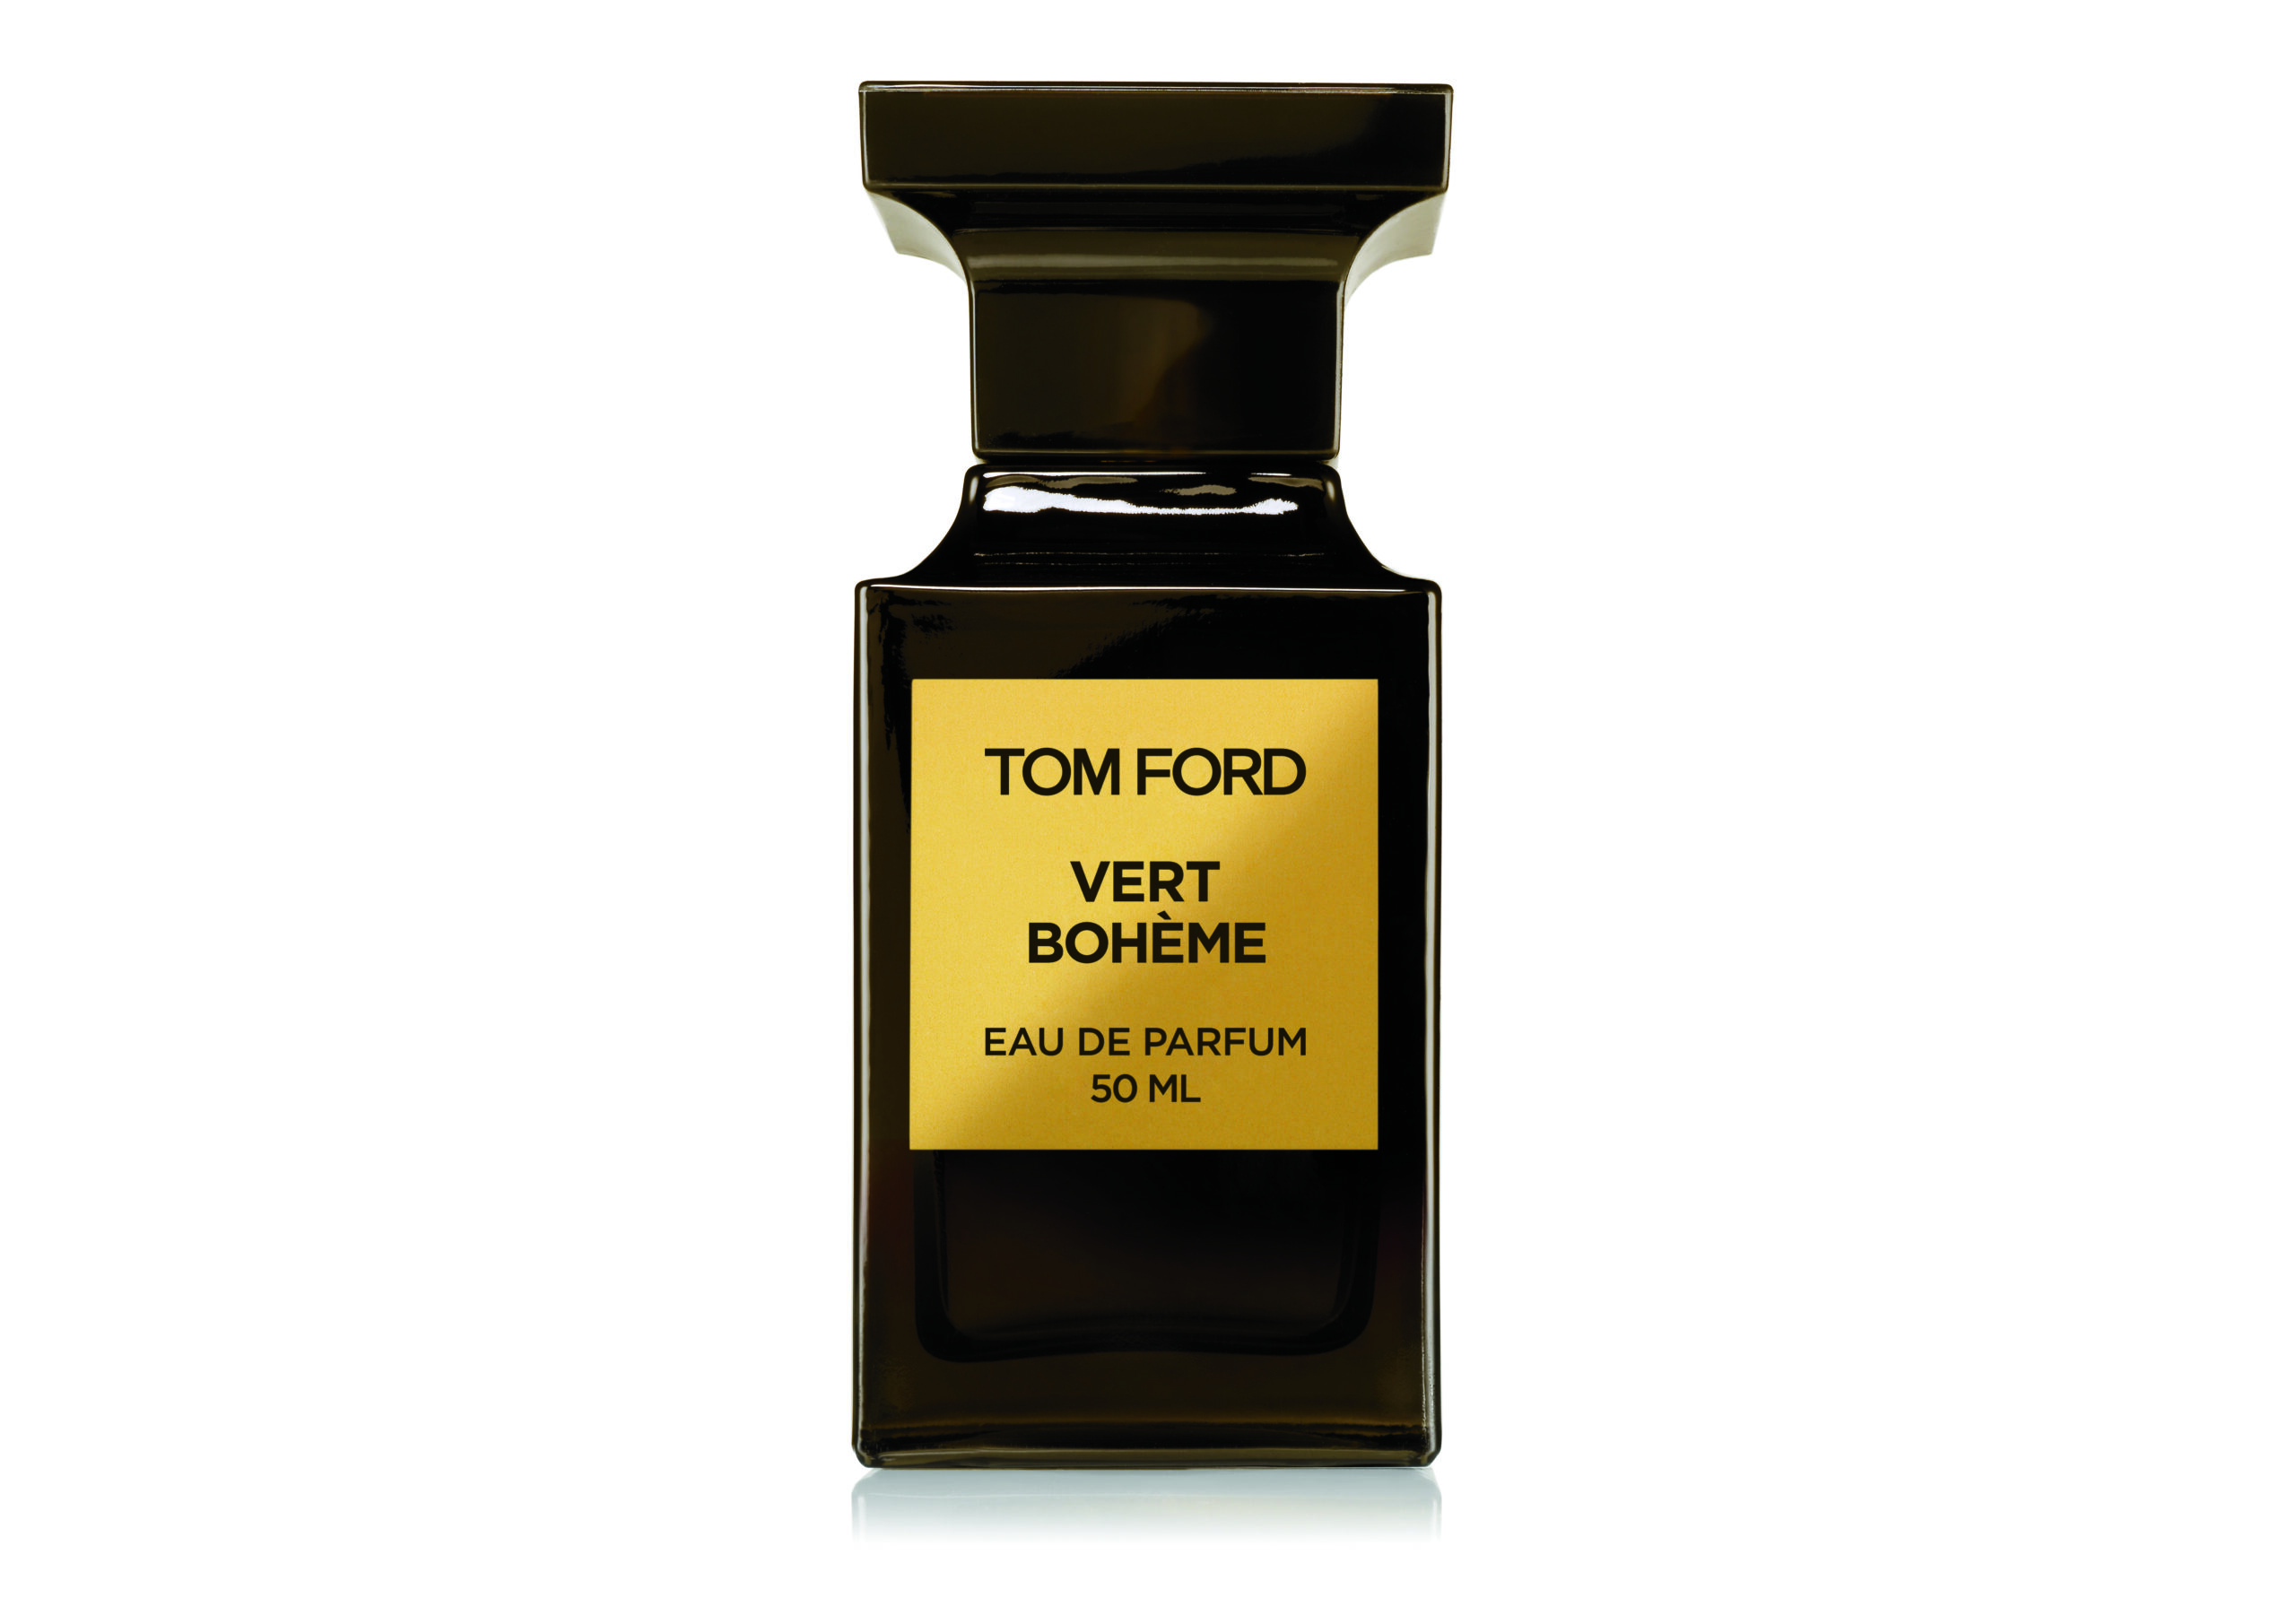 Tom Ford Private Blend Collection Les Extraits Verts offer modern interpretations of classically-inspired green olfactive notes